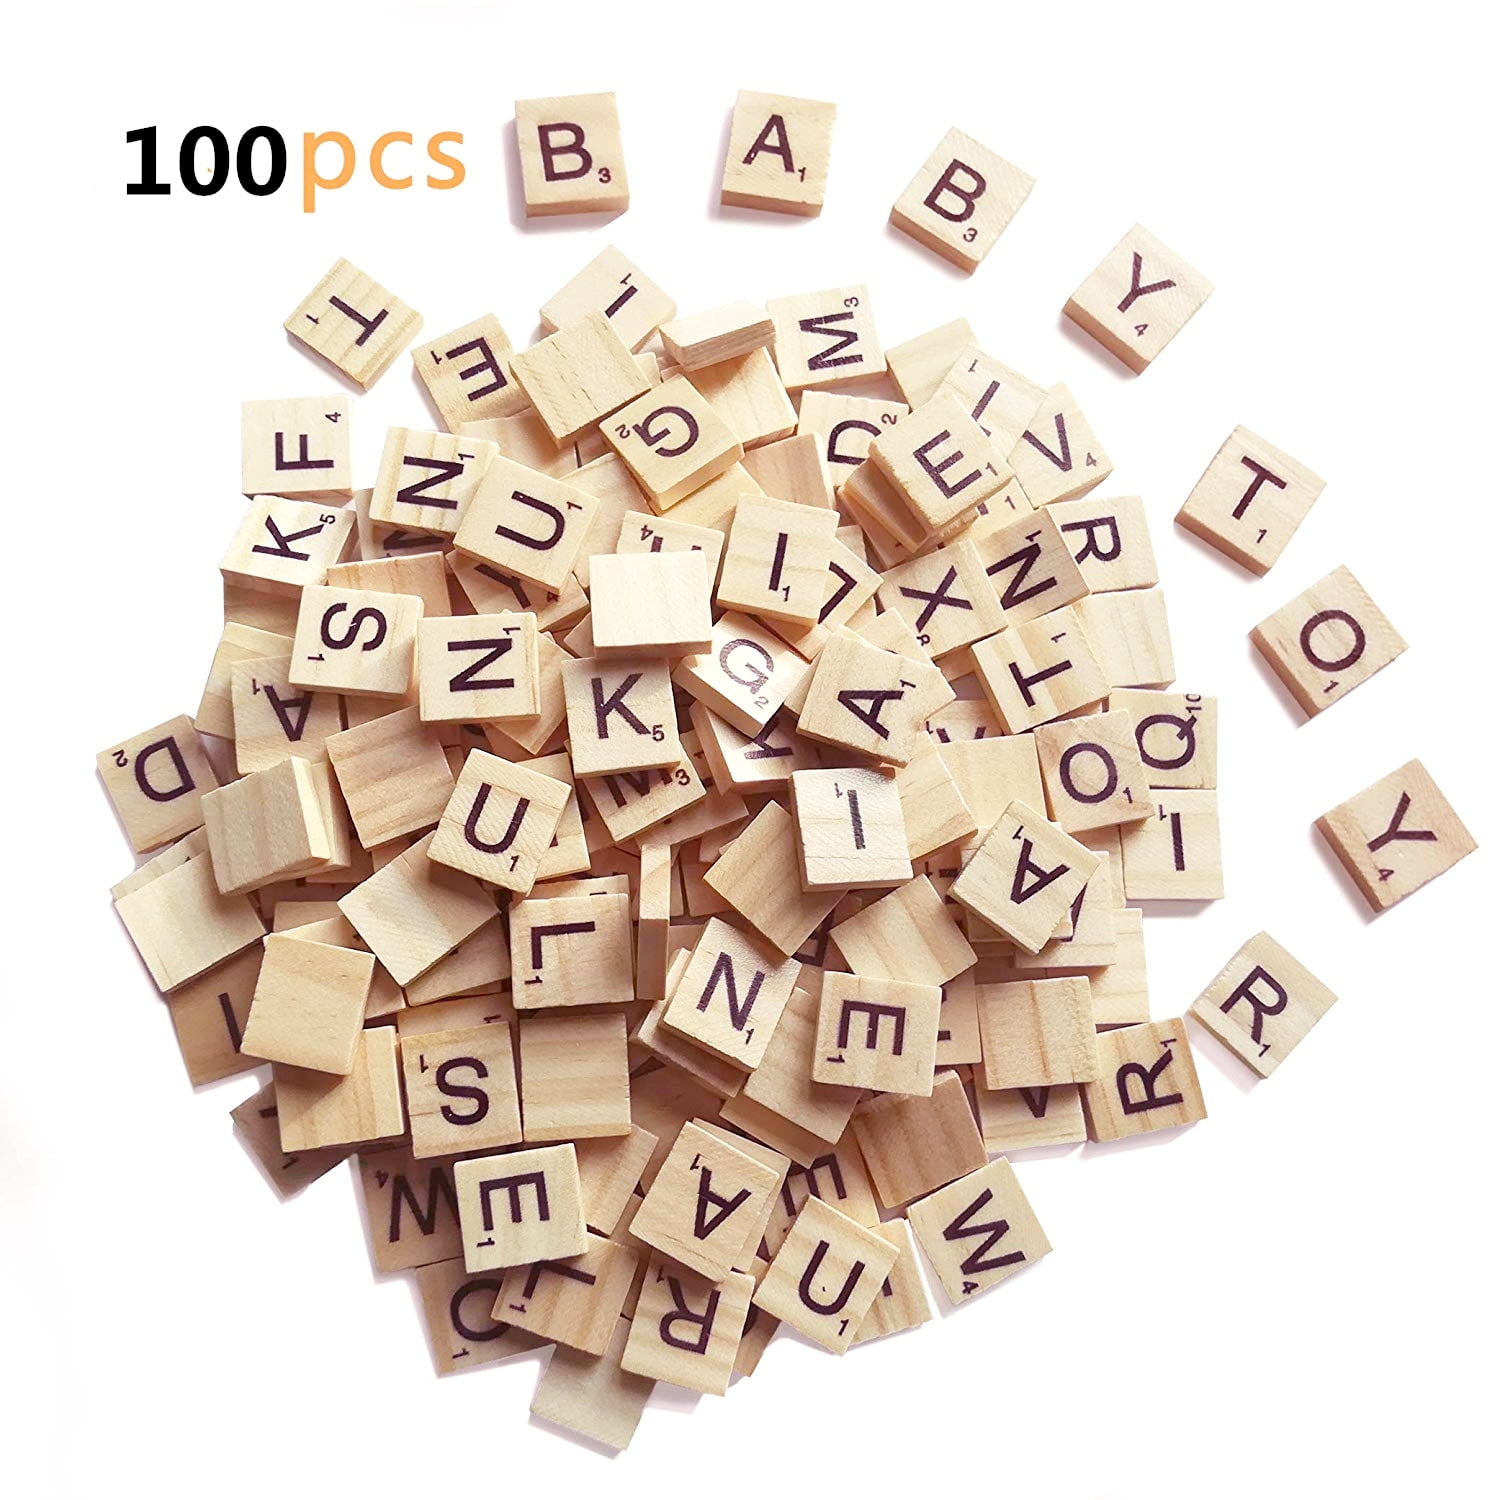 100Pcs Mix Wooden Scrabble Tiles Letters Craft Alphabet Board Game Fun Toy Gift 